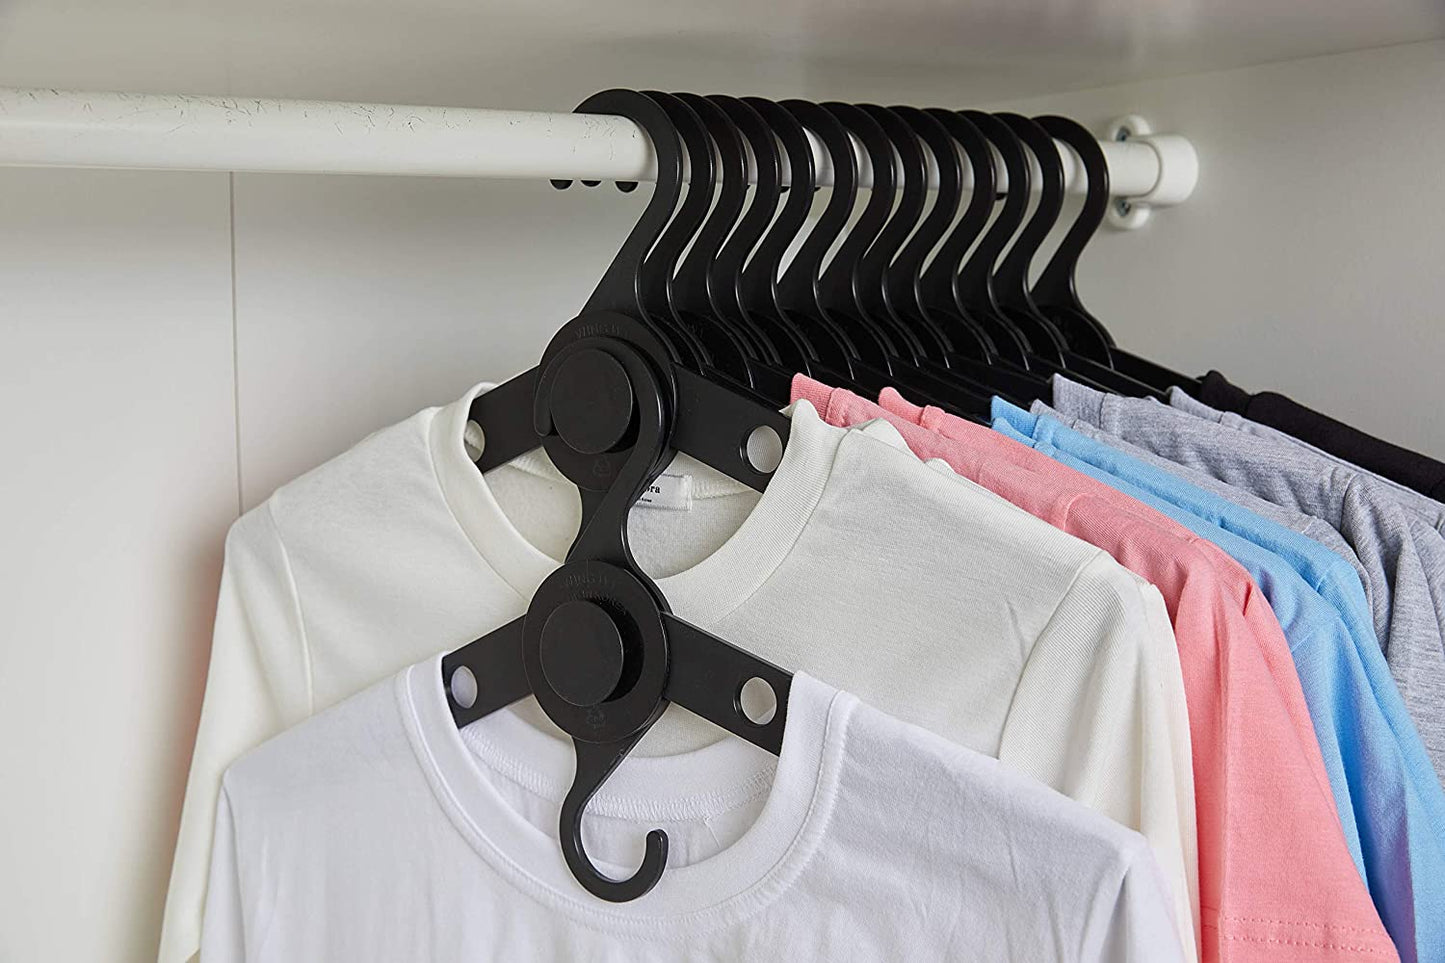 Ultimate Wing Hanger - The Smarter, Space-Saving Solution for Your Clothes MMi Products UK